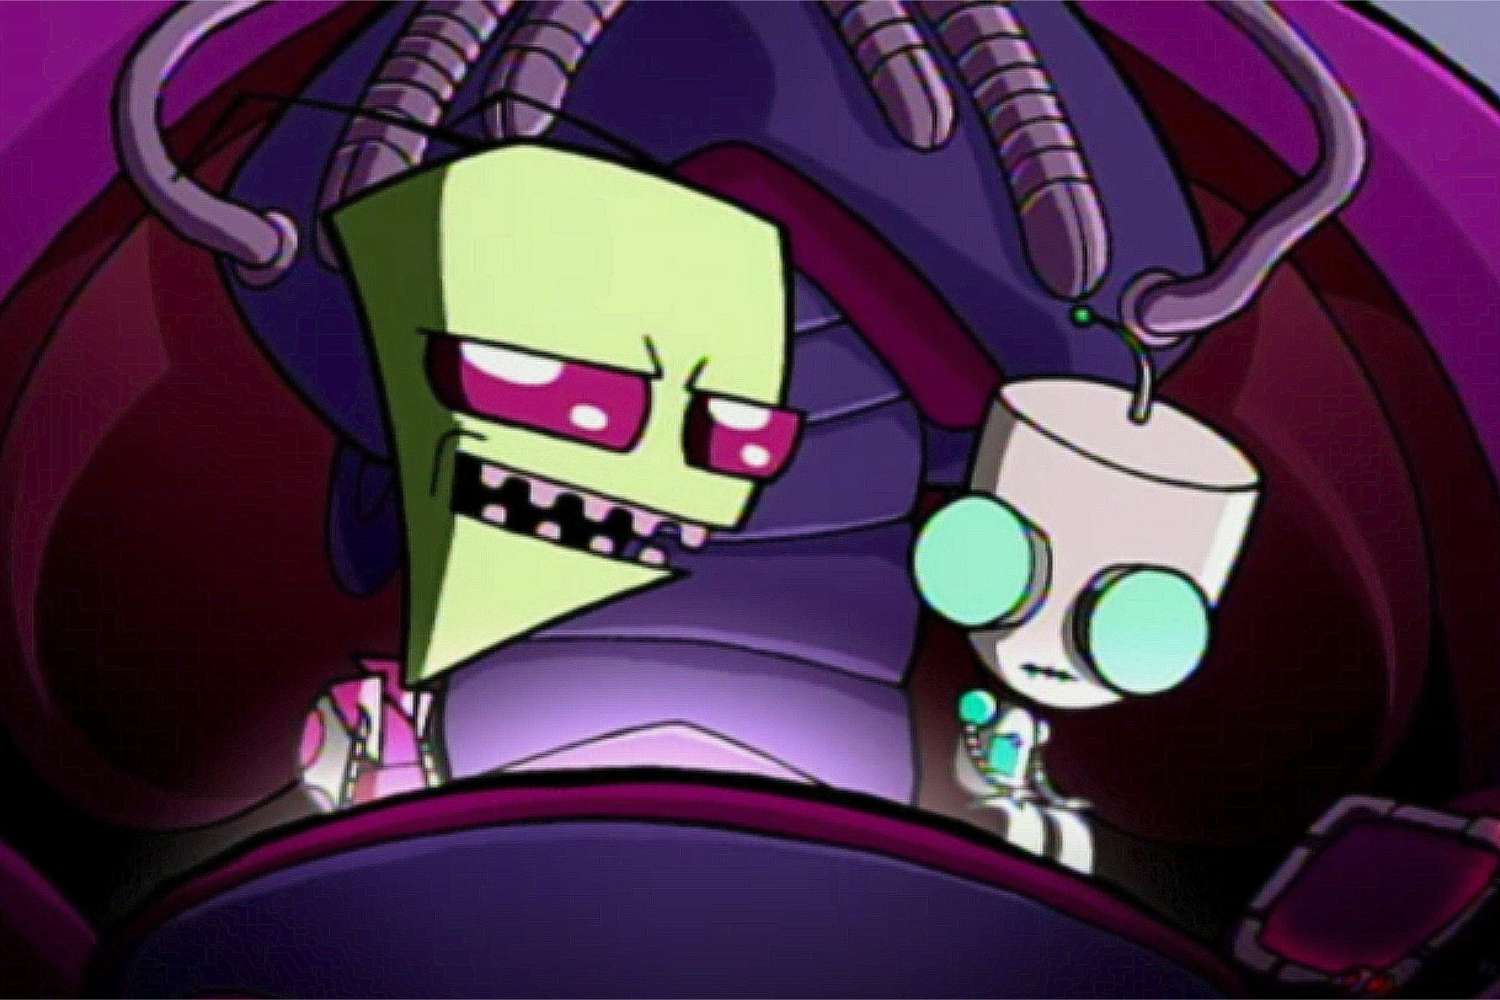 connie barth recommends pics of invader zim pic